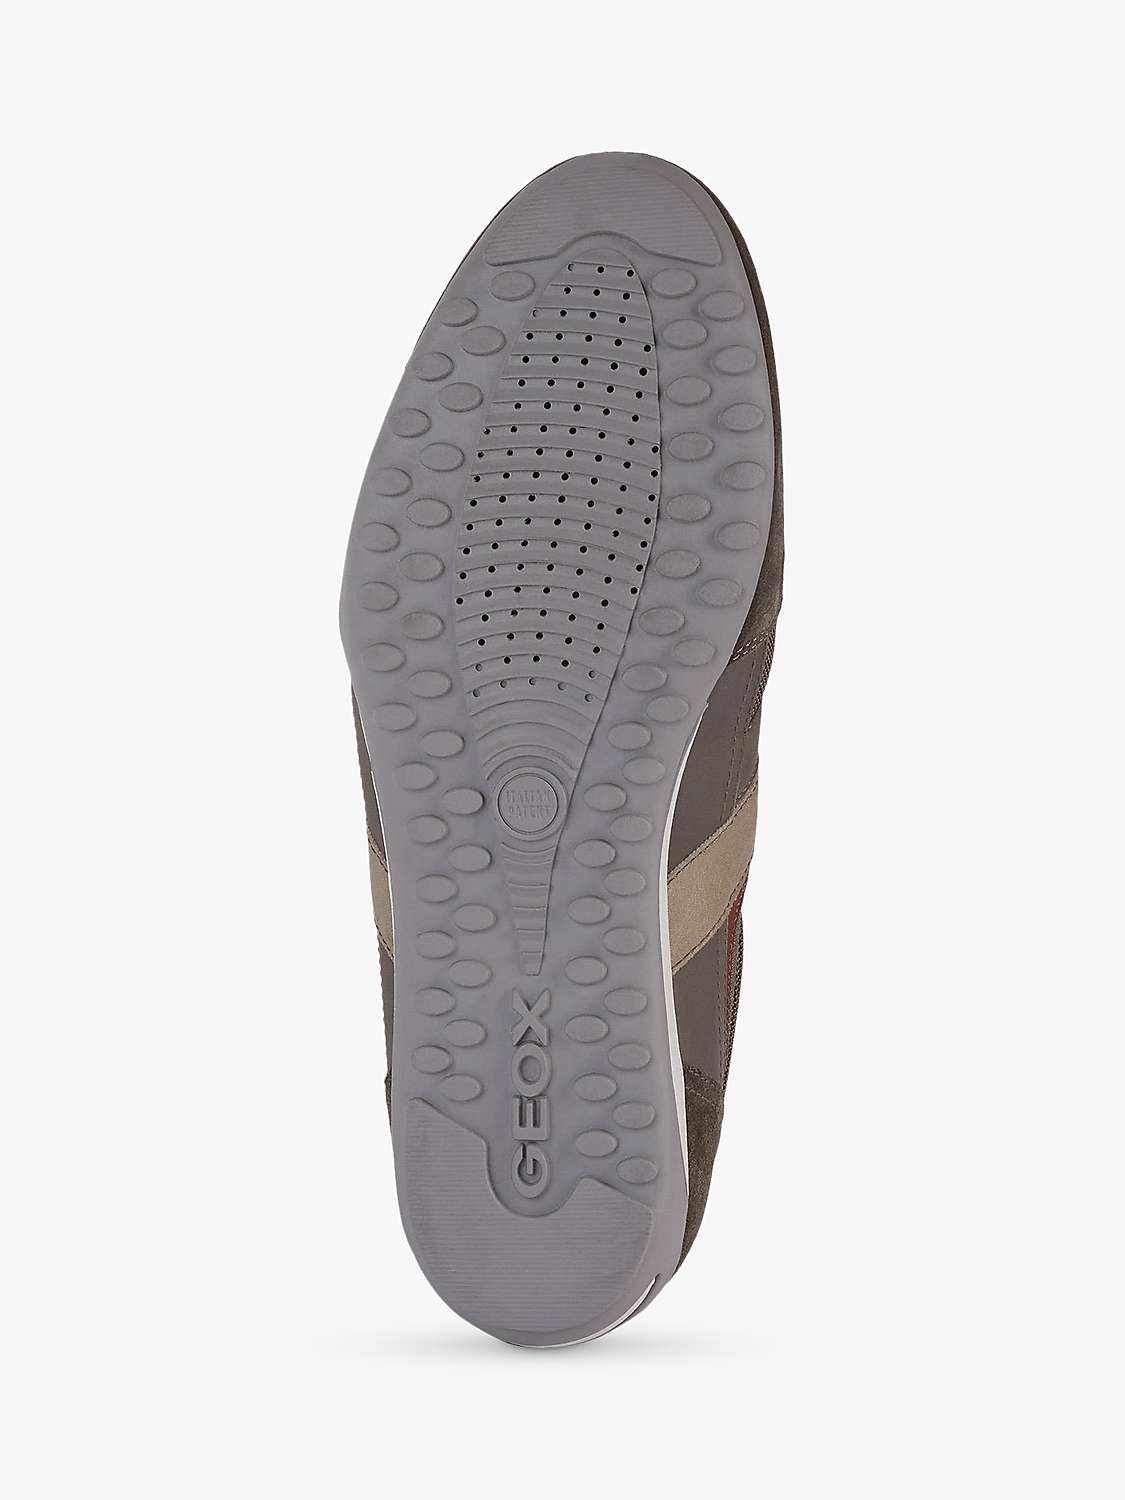 Buy Geox Wells Leather Trainers Online at johnlewis.com